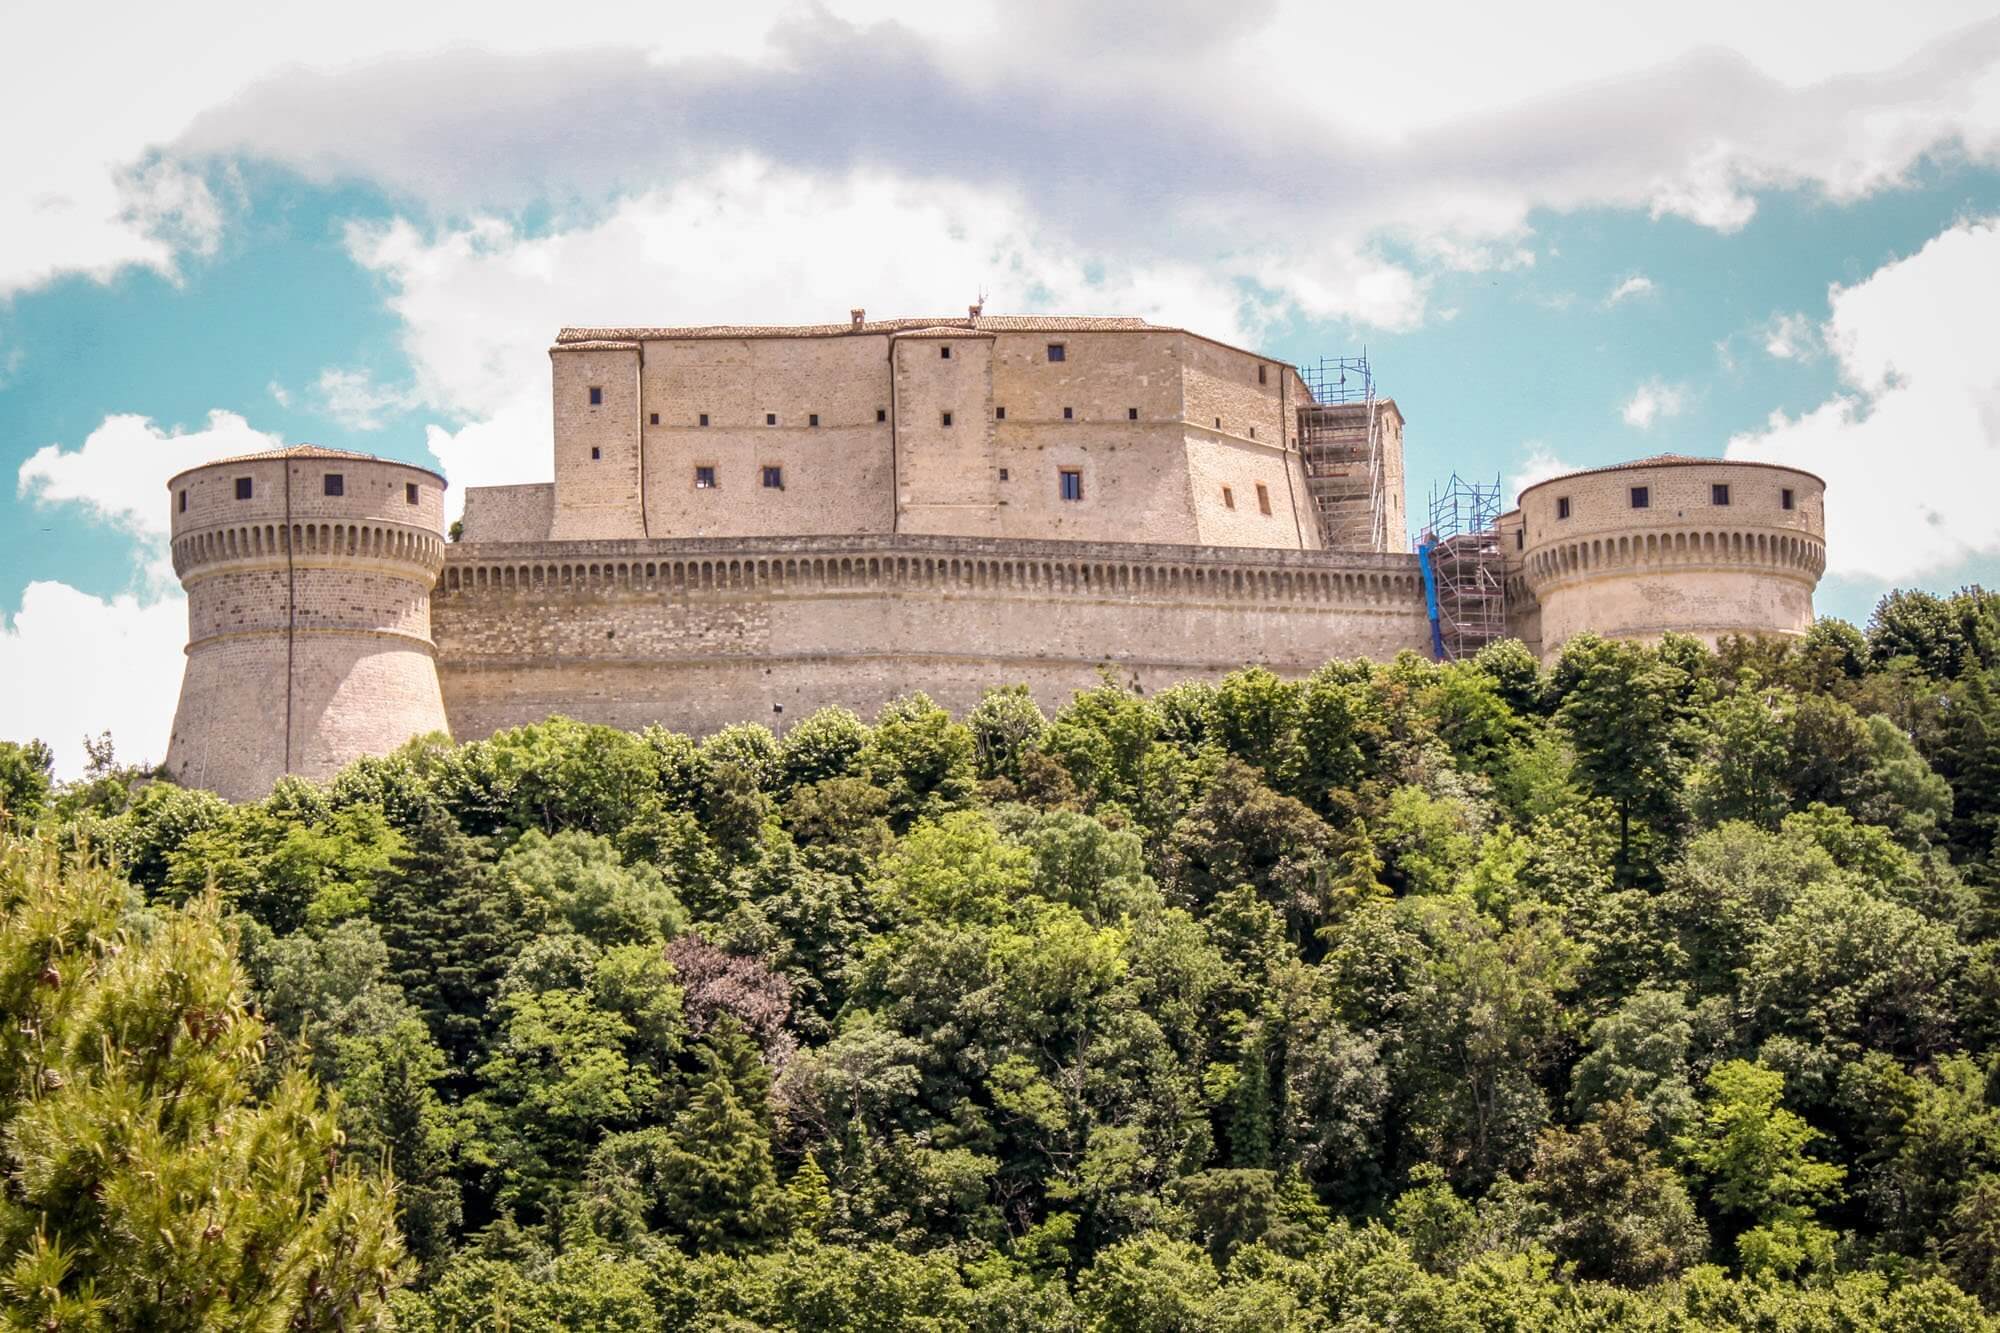 The fortress in San Leo, Le Marche, Italy